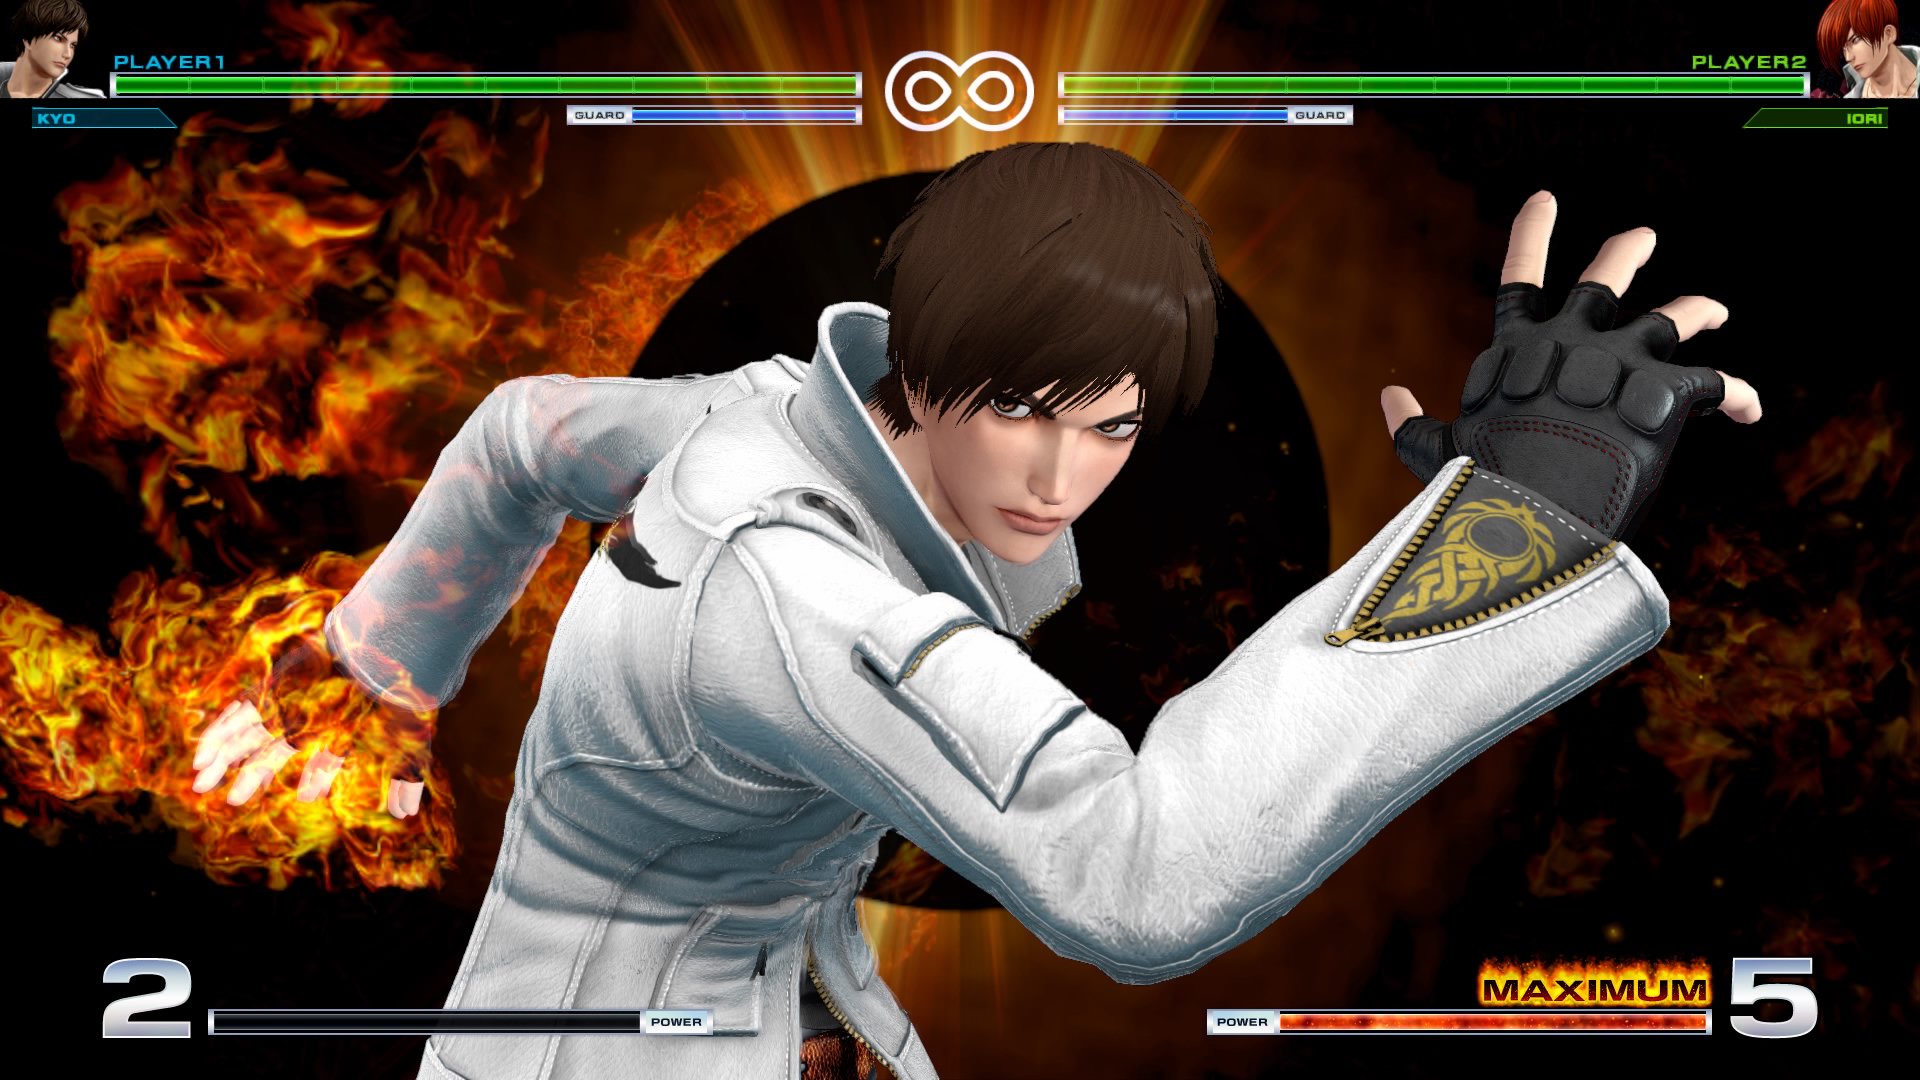 king-of-fighter-annuncio-patch-grafica-gamesoul